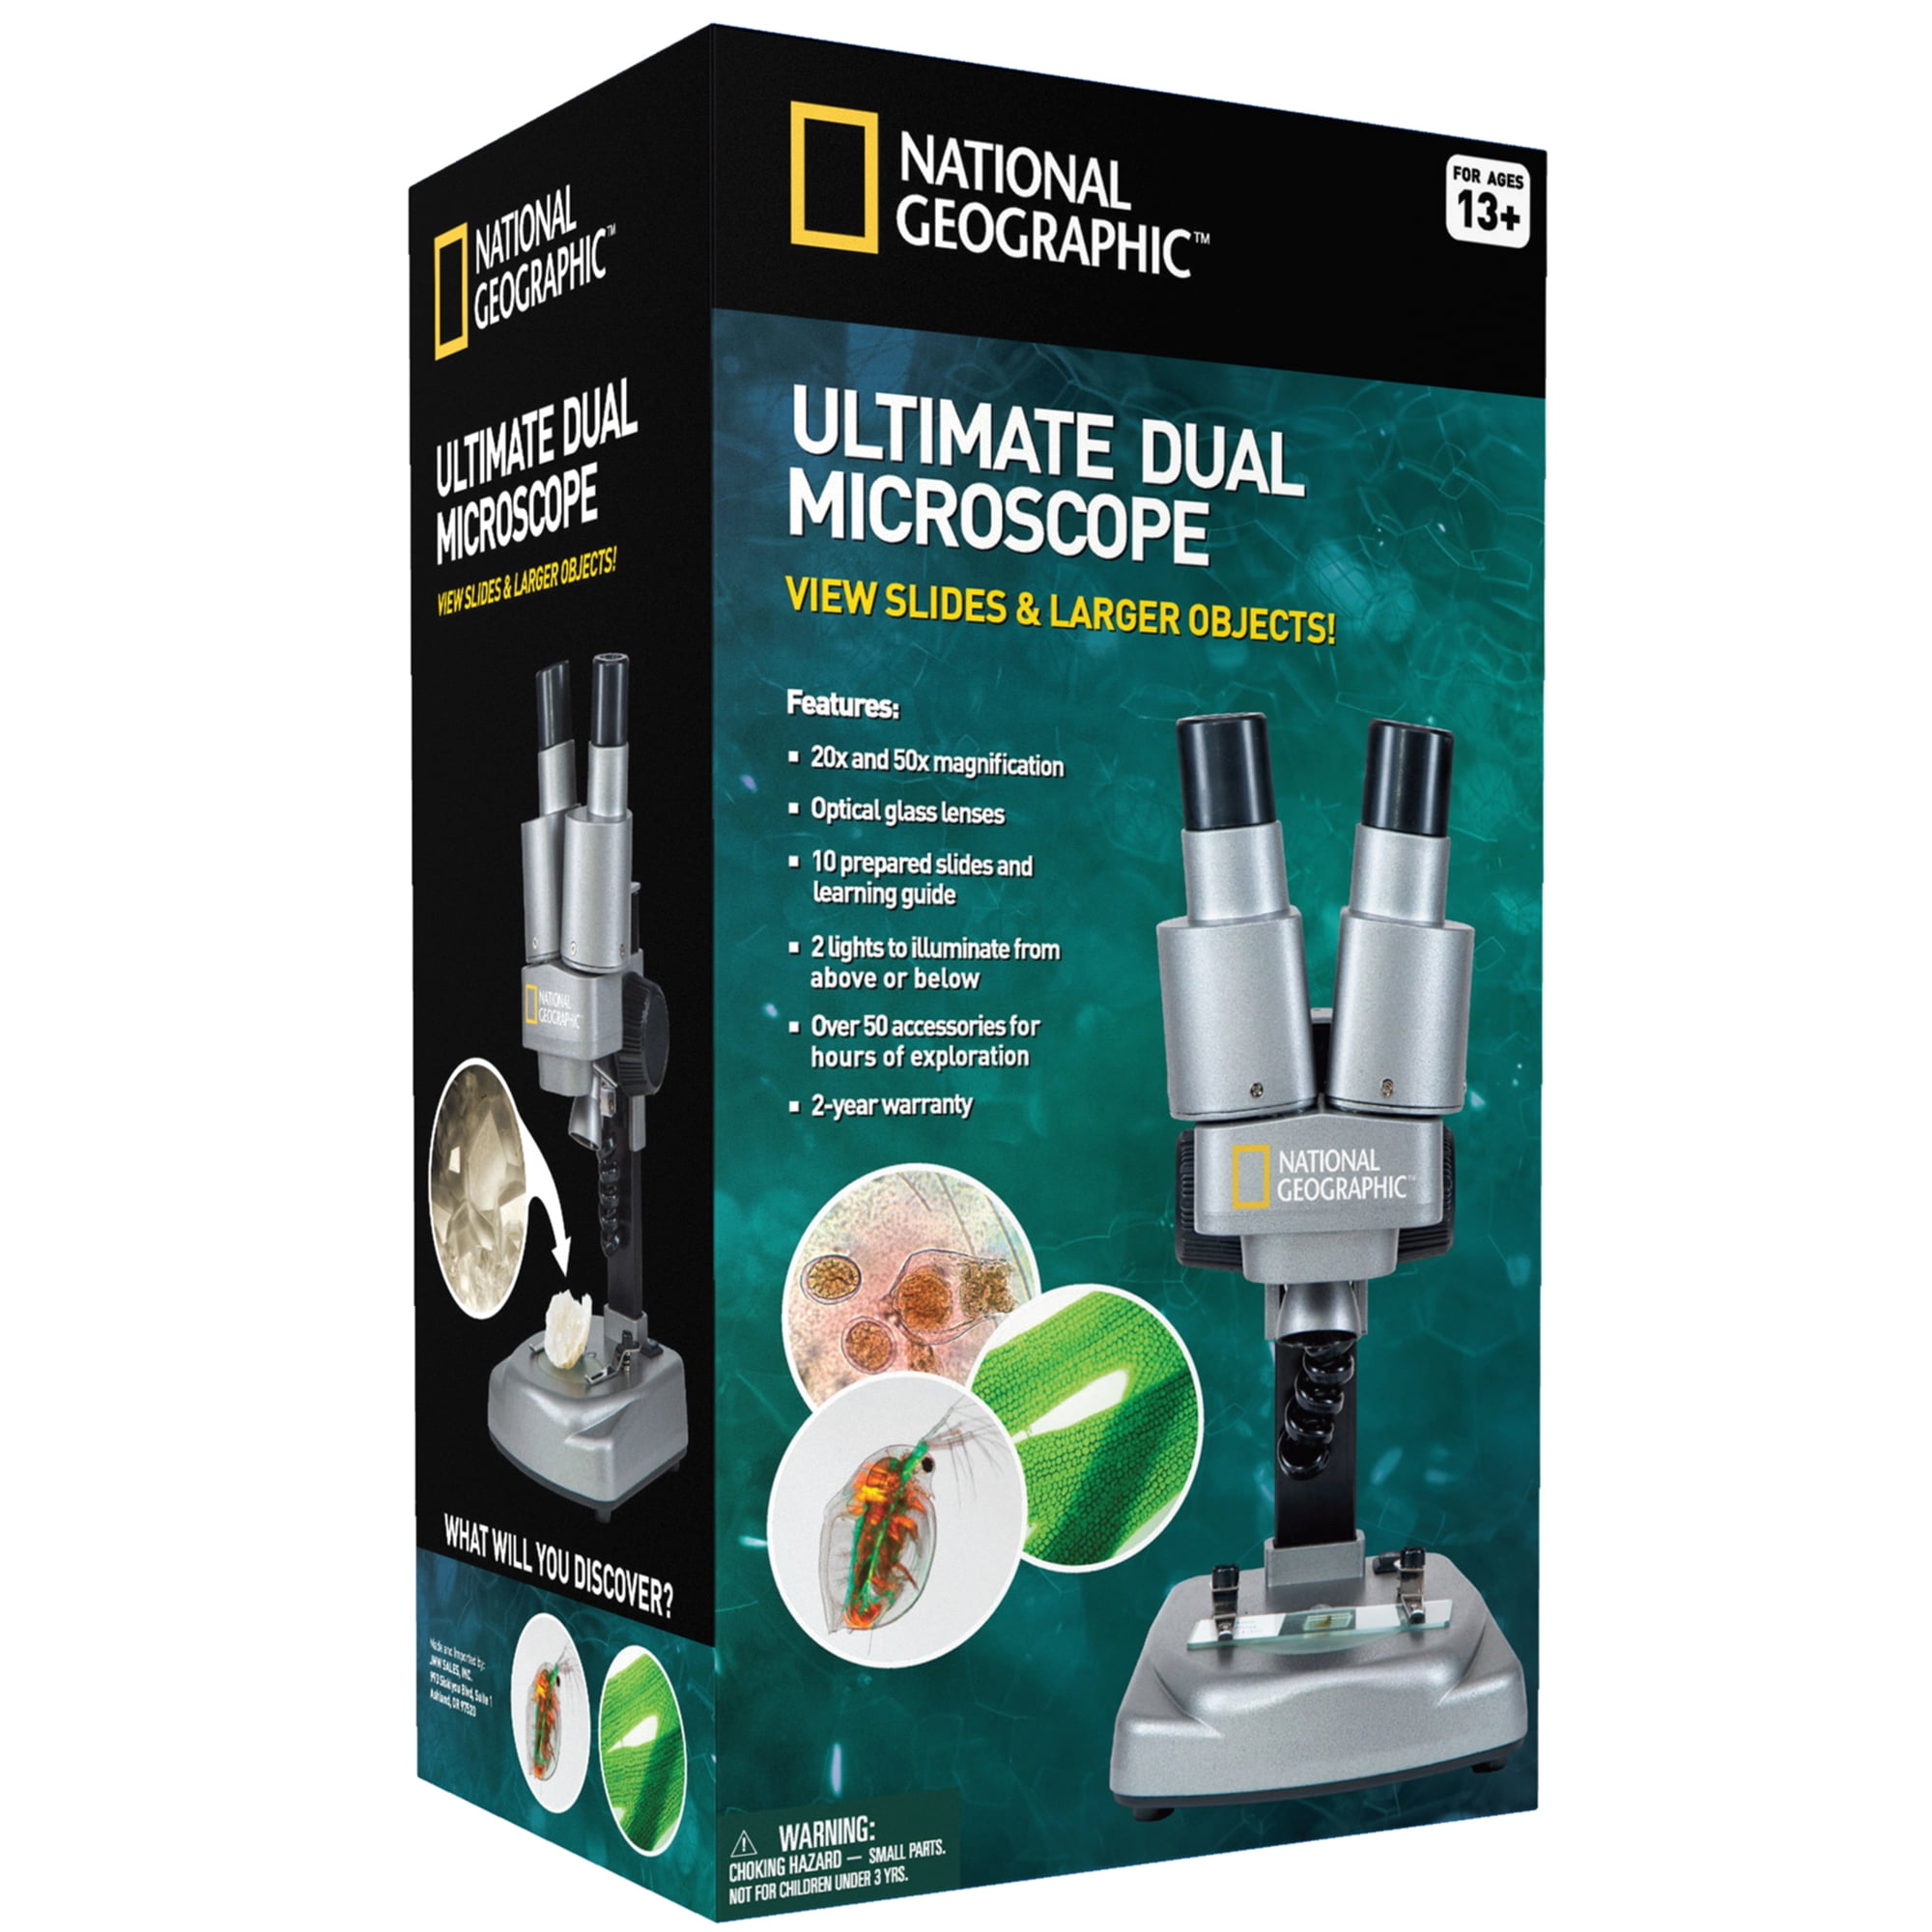 Deception adjust petal Microscope by National Geographic - Dual Purpose Illumination and More than  50 Accessories! - Walmart.com